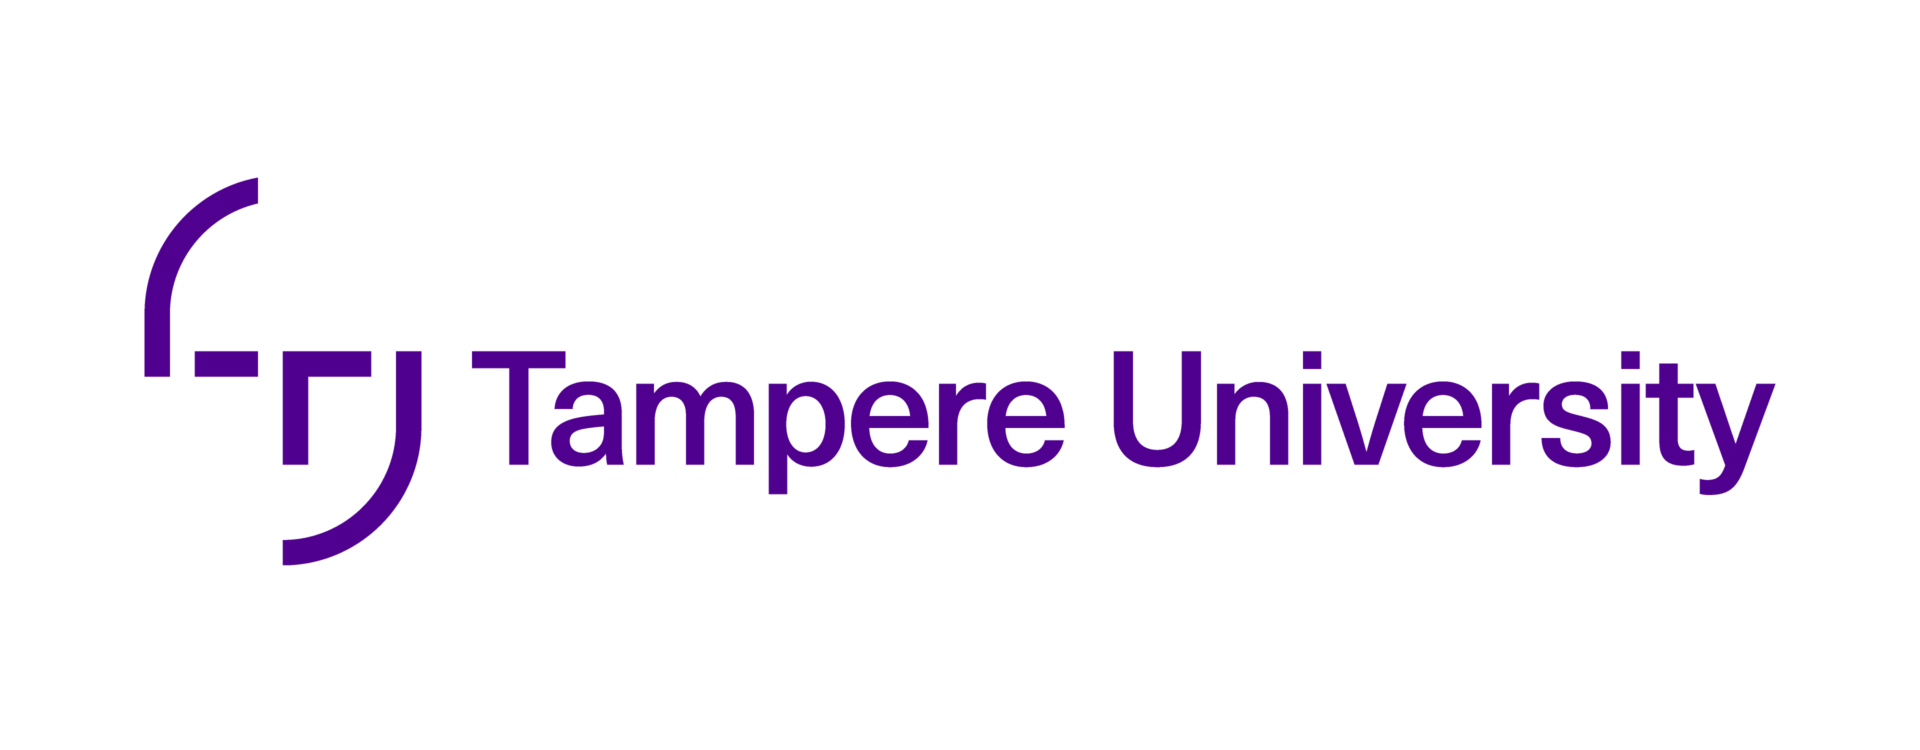 University of Tampere